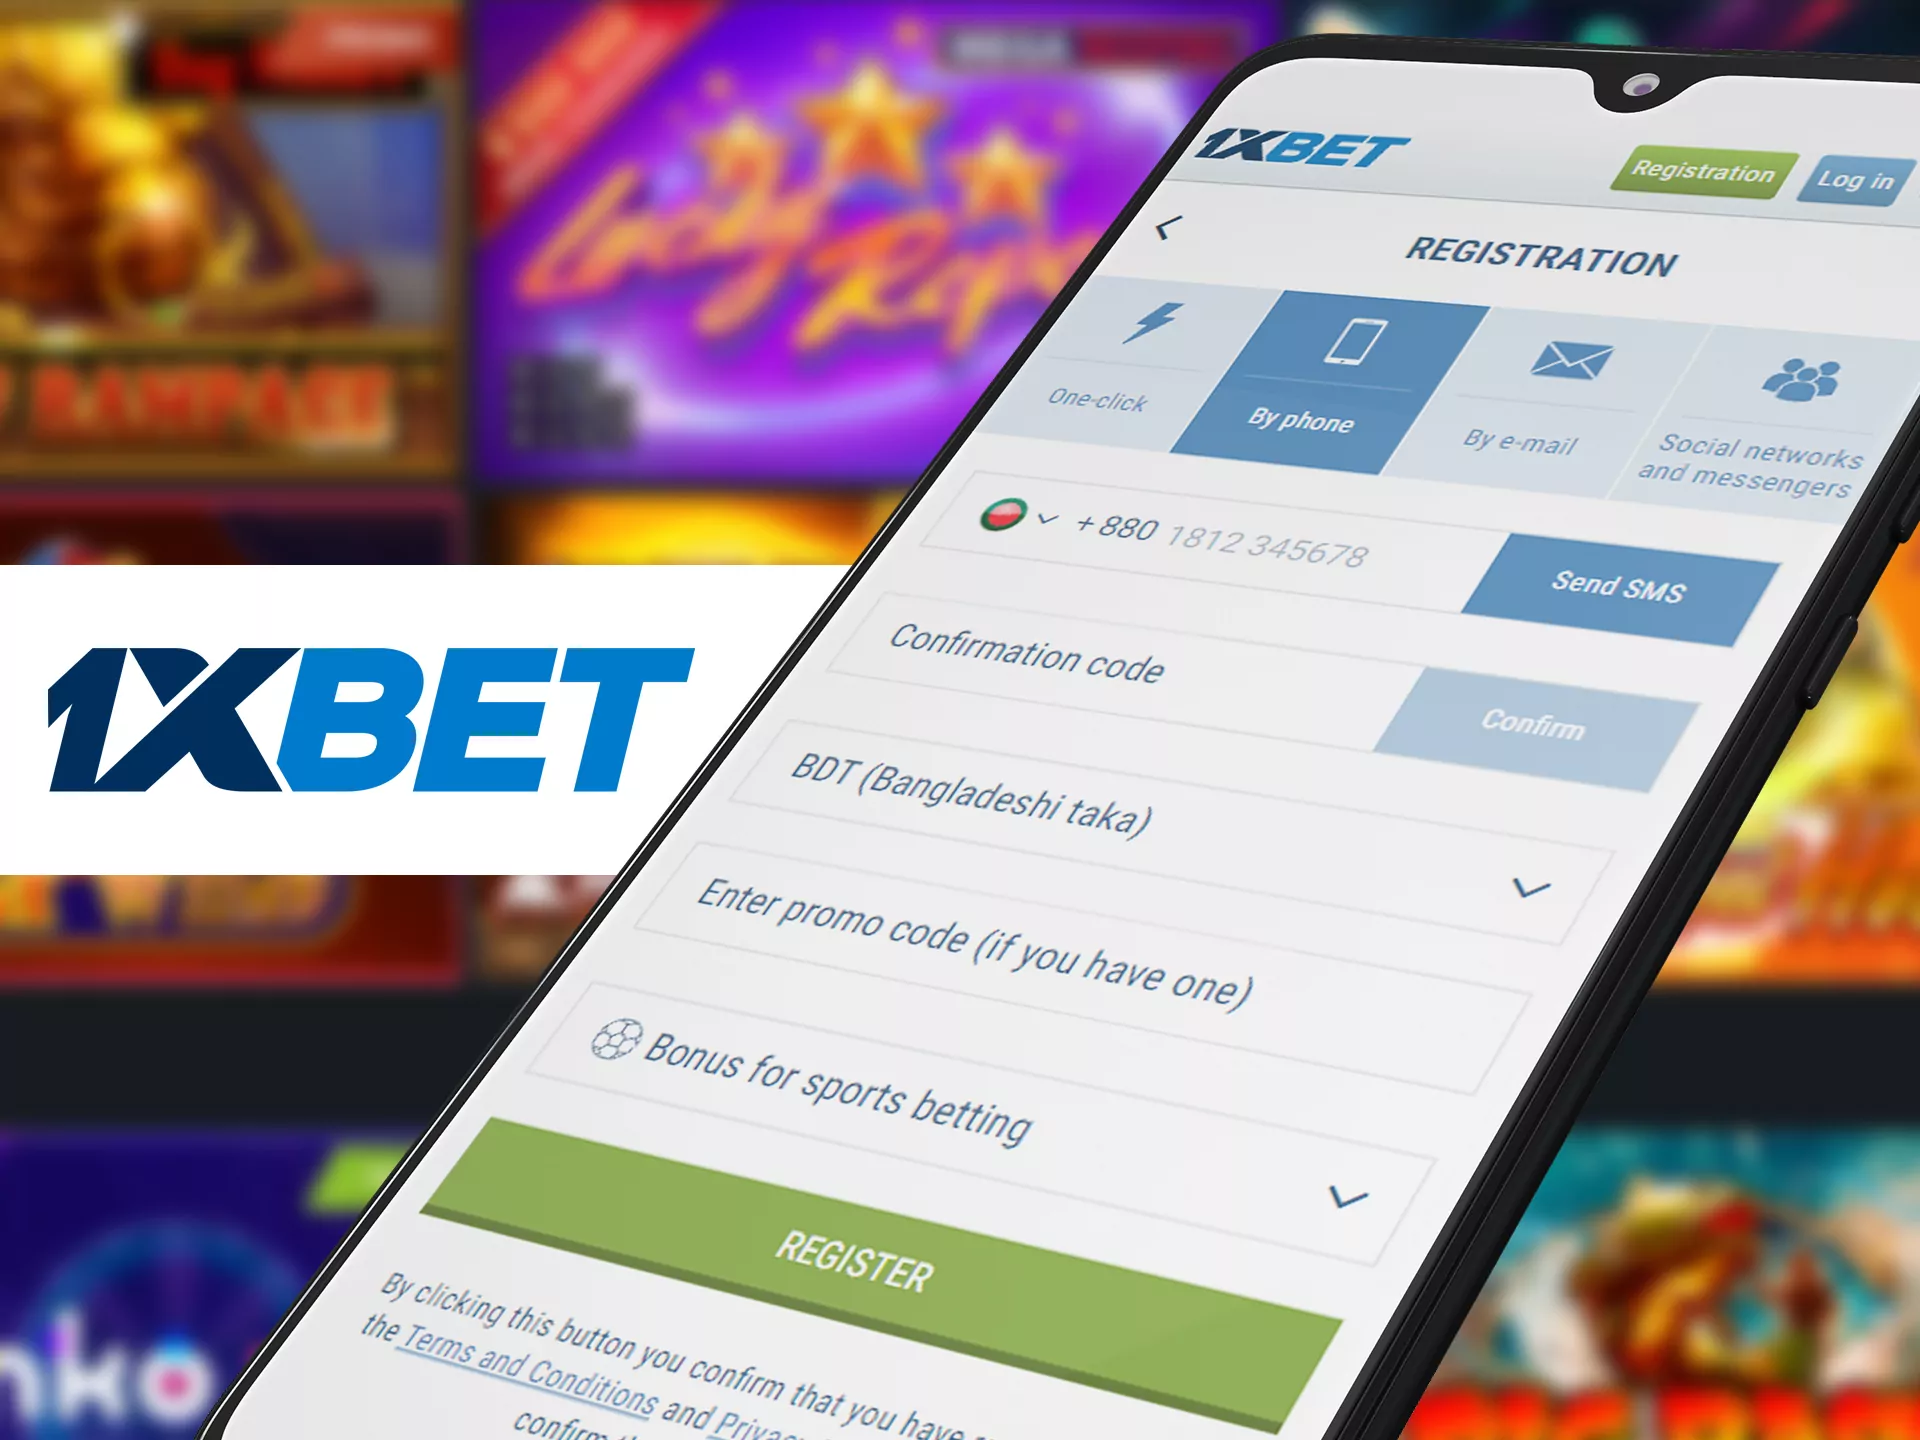 Registrate at 1xbet with app.